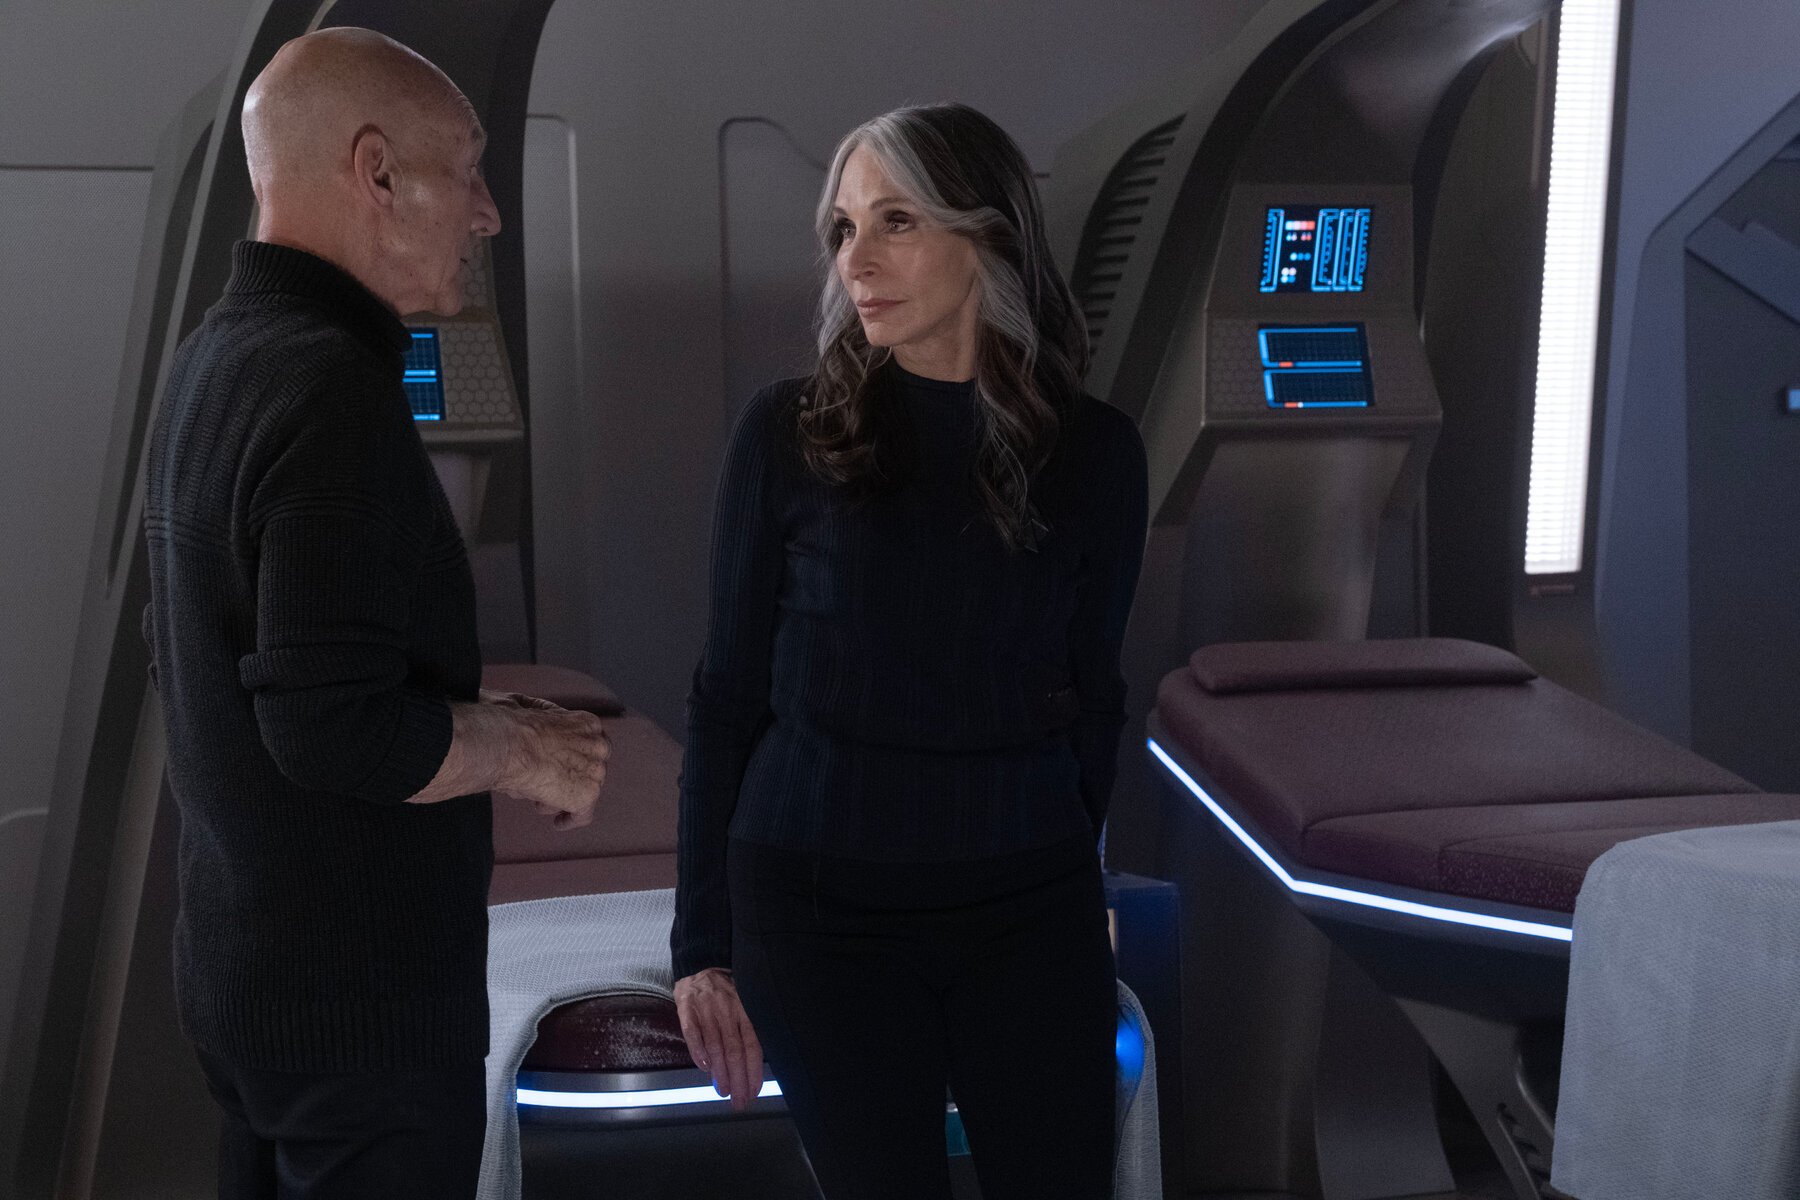 Patrick Stewart as Jean-luc Picard and Gates McFadden as Beverly Crusher in 'Star Trek: Picard.' They are in sickbay, and we see both of them from the thighs up. Picard is in profile as he talks to her. He is dressed in all black, and is bald. Beverly is leaning against a sickbay bed with her body turned toward the camera, but her head turned toward Picard. She's also dressed all in black. She has long, salt-and-pepper hair. 